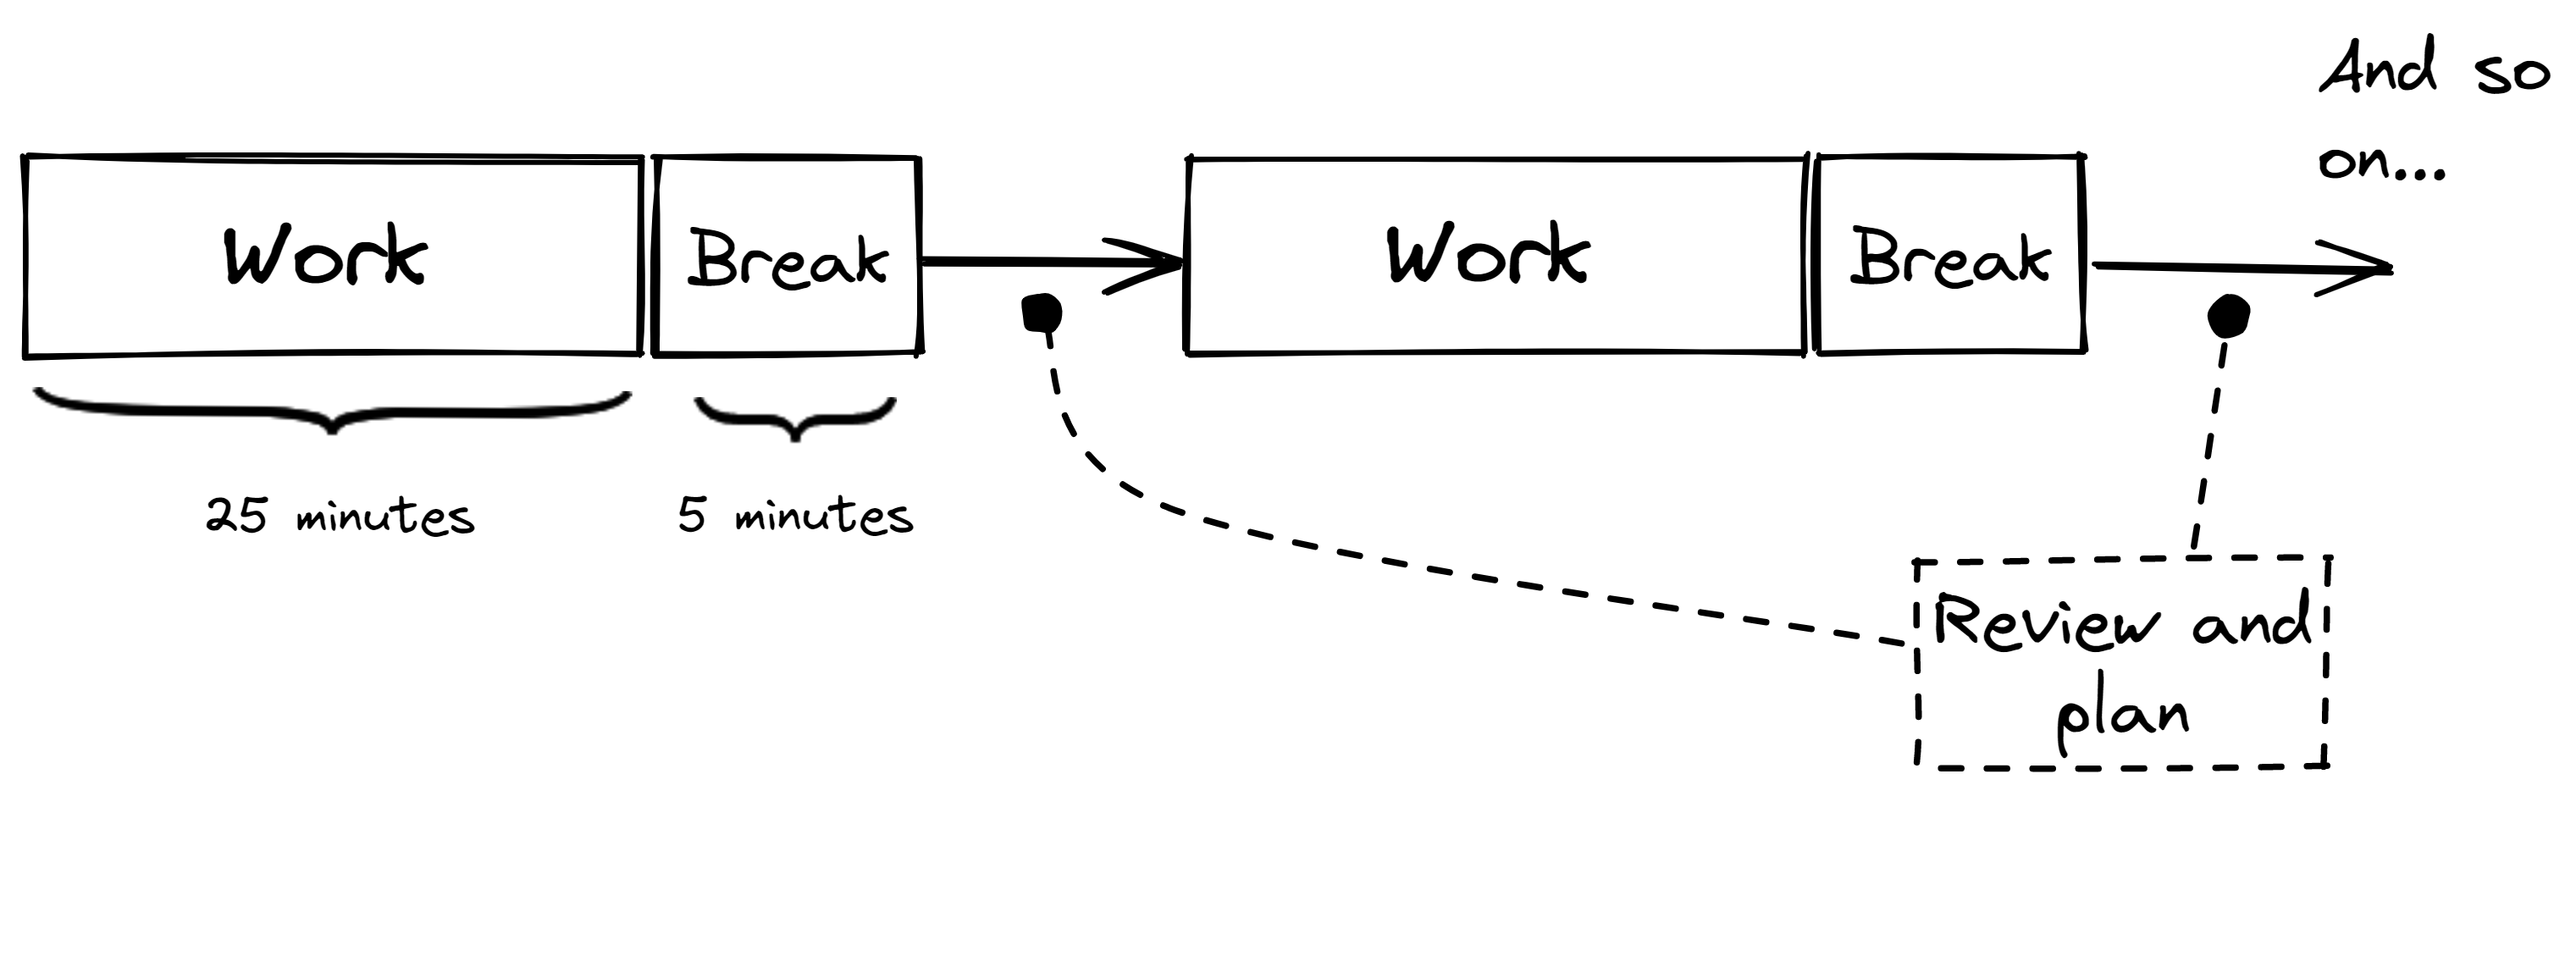 Figure 1.3: The Pomodoro technique provides spaces for thinking and rest